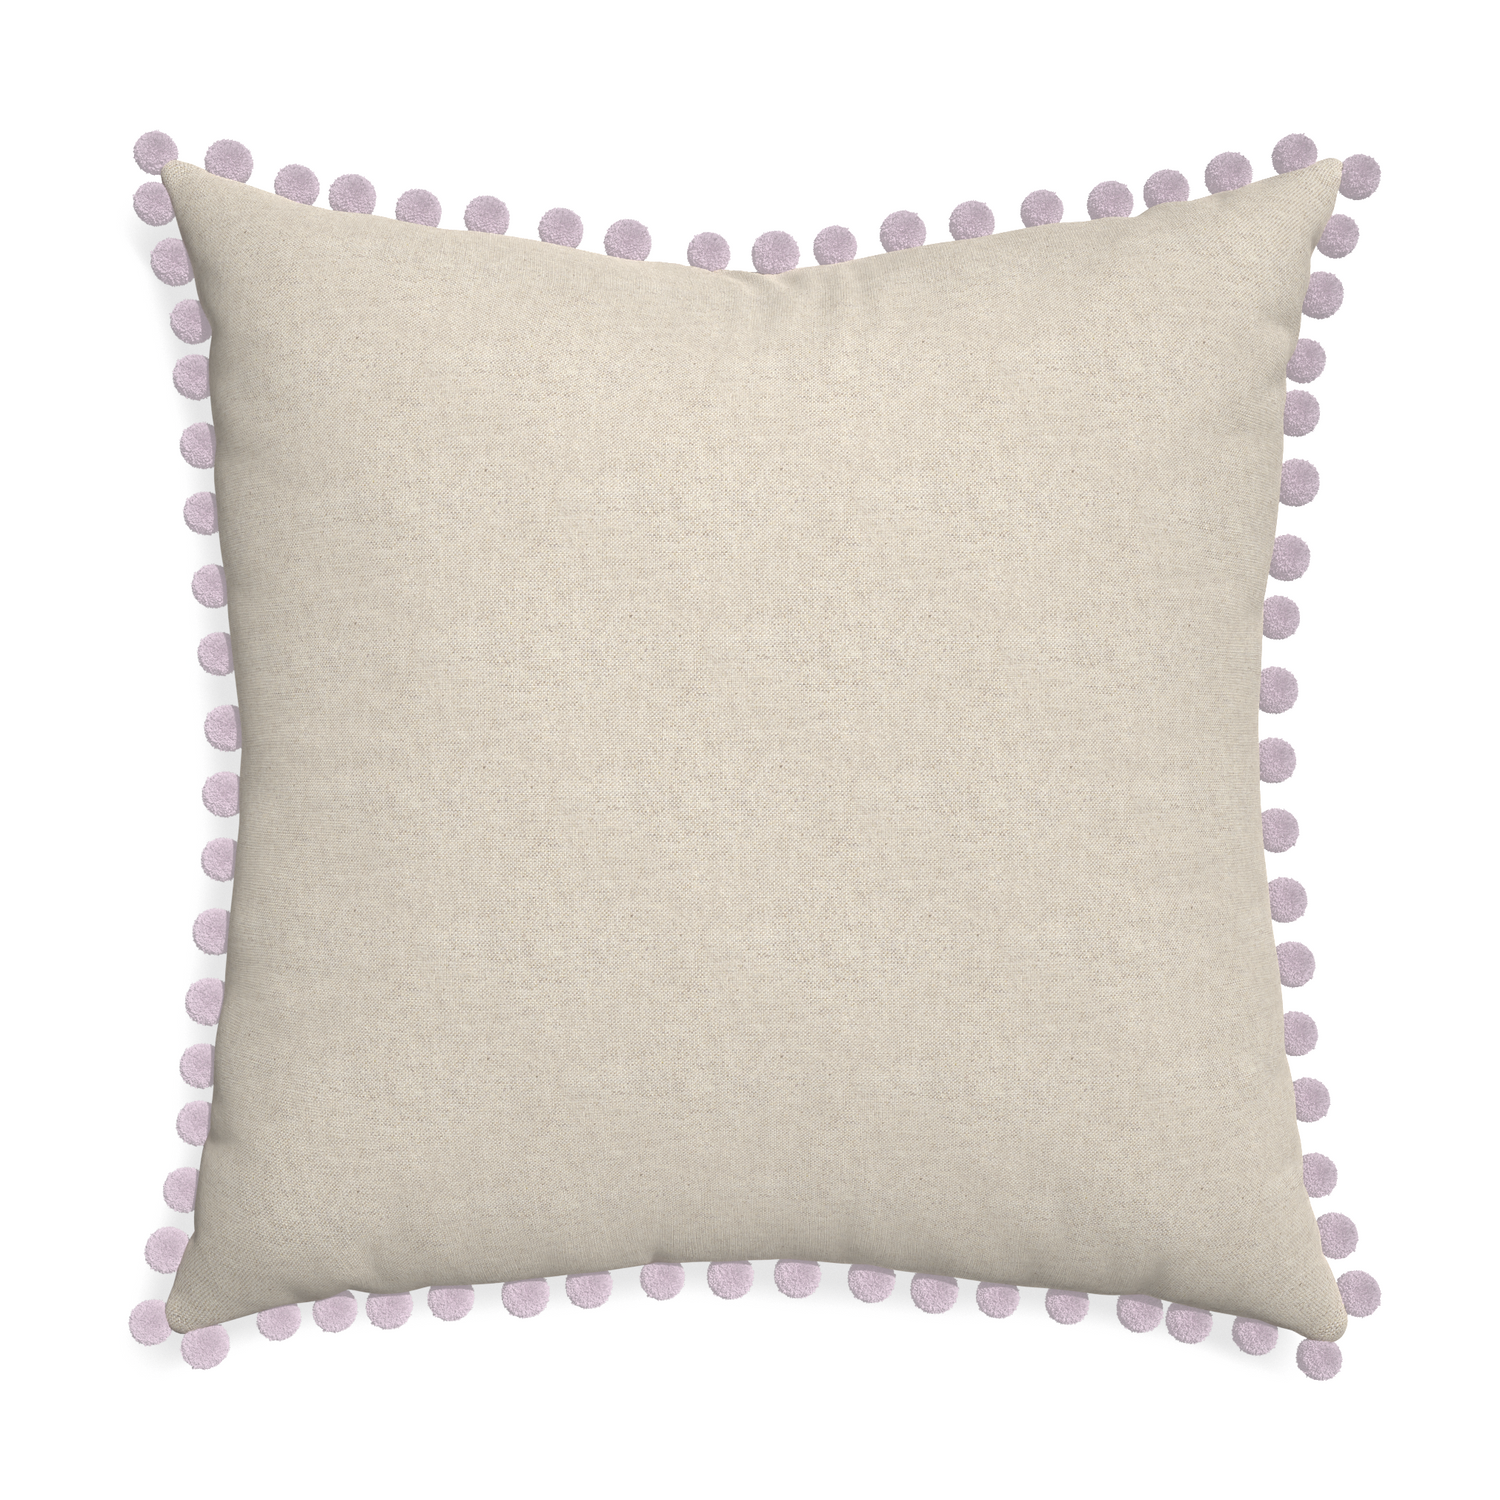 Euro-sham oat custom pillow with l on white background